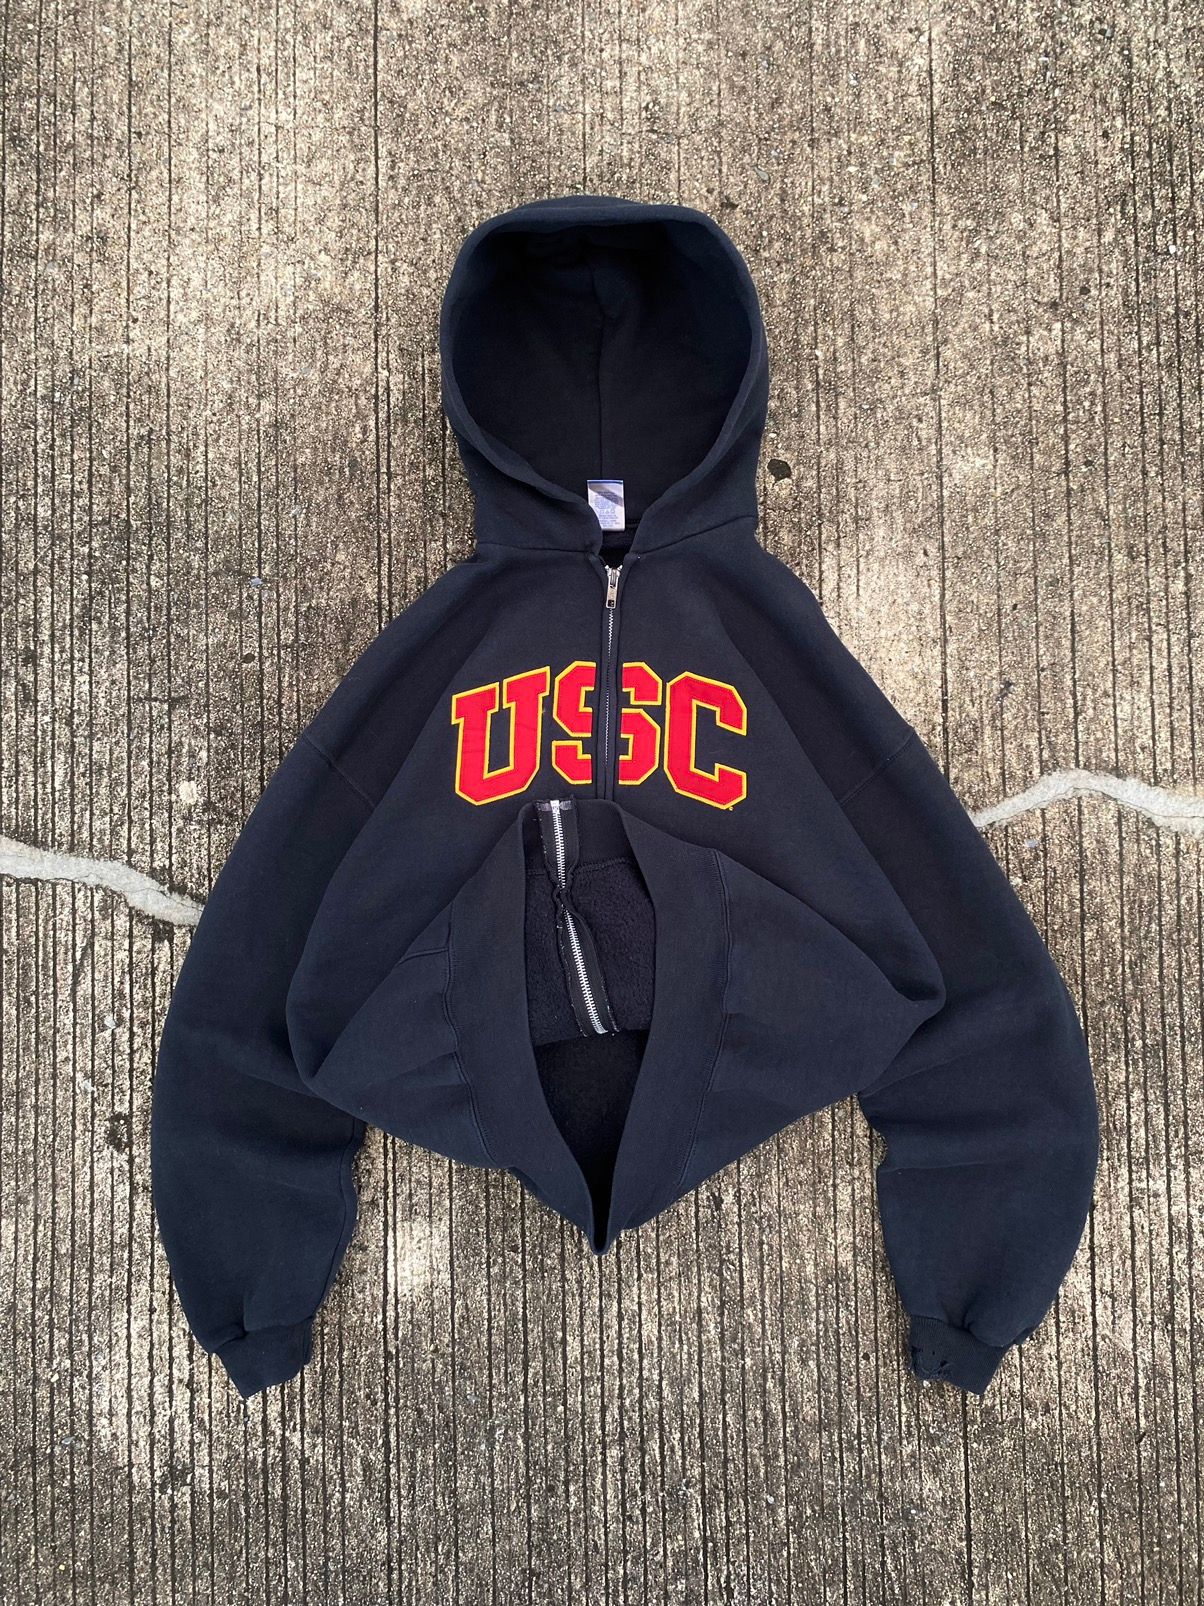 Pre-owned Russell Athletic X Vintage Usc Russell Athletic Hoodie In Black